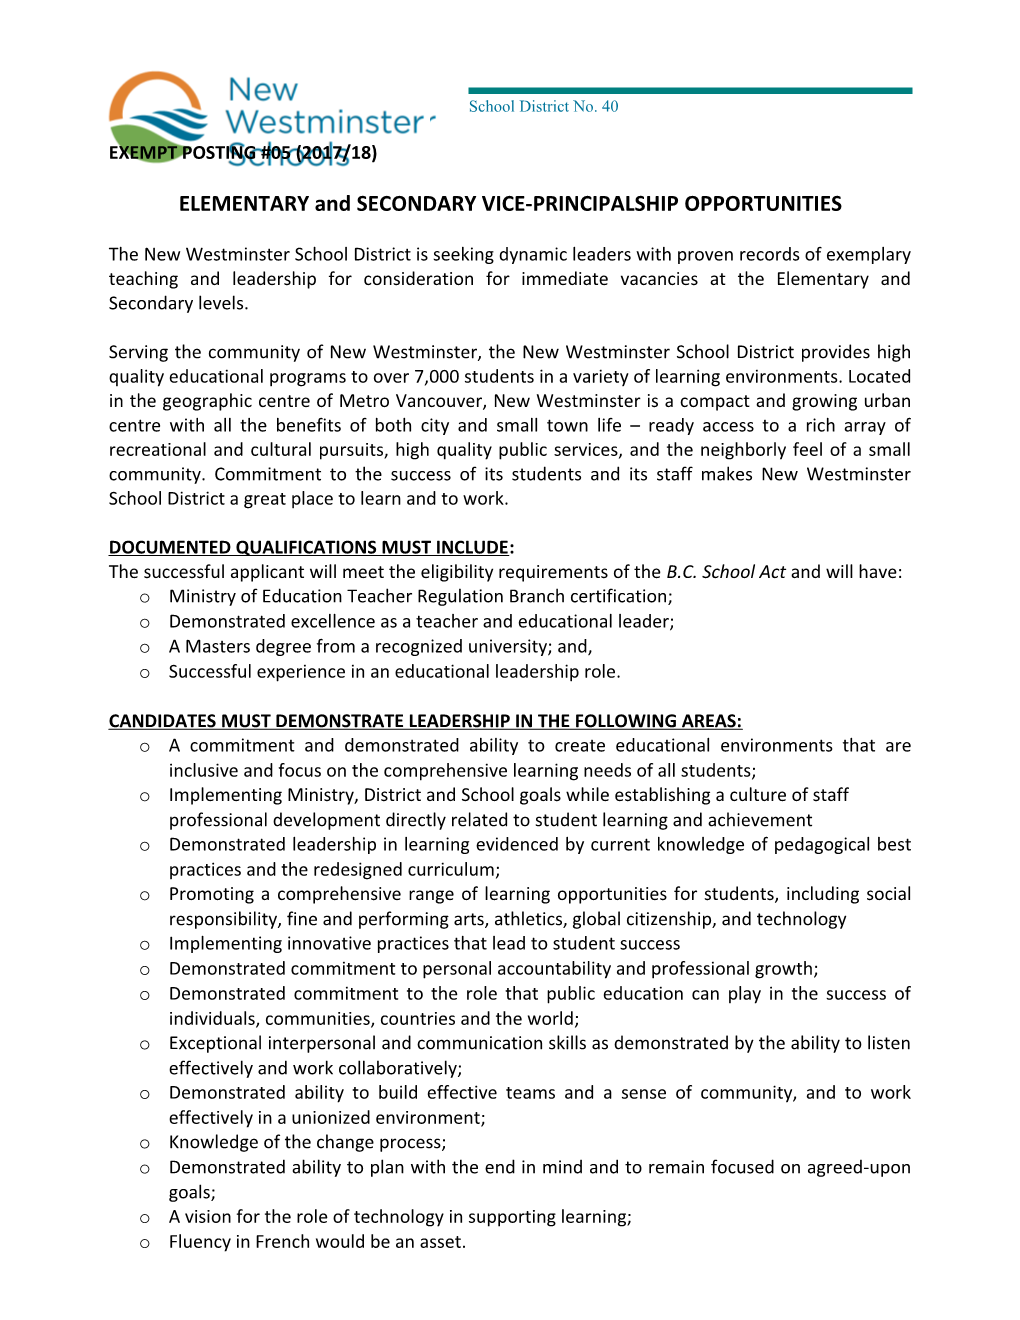 ELEMENTARY and SECONDARY VICE-PRINCIPALSHIP OPPORTUNITIES